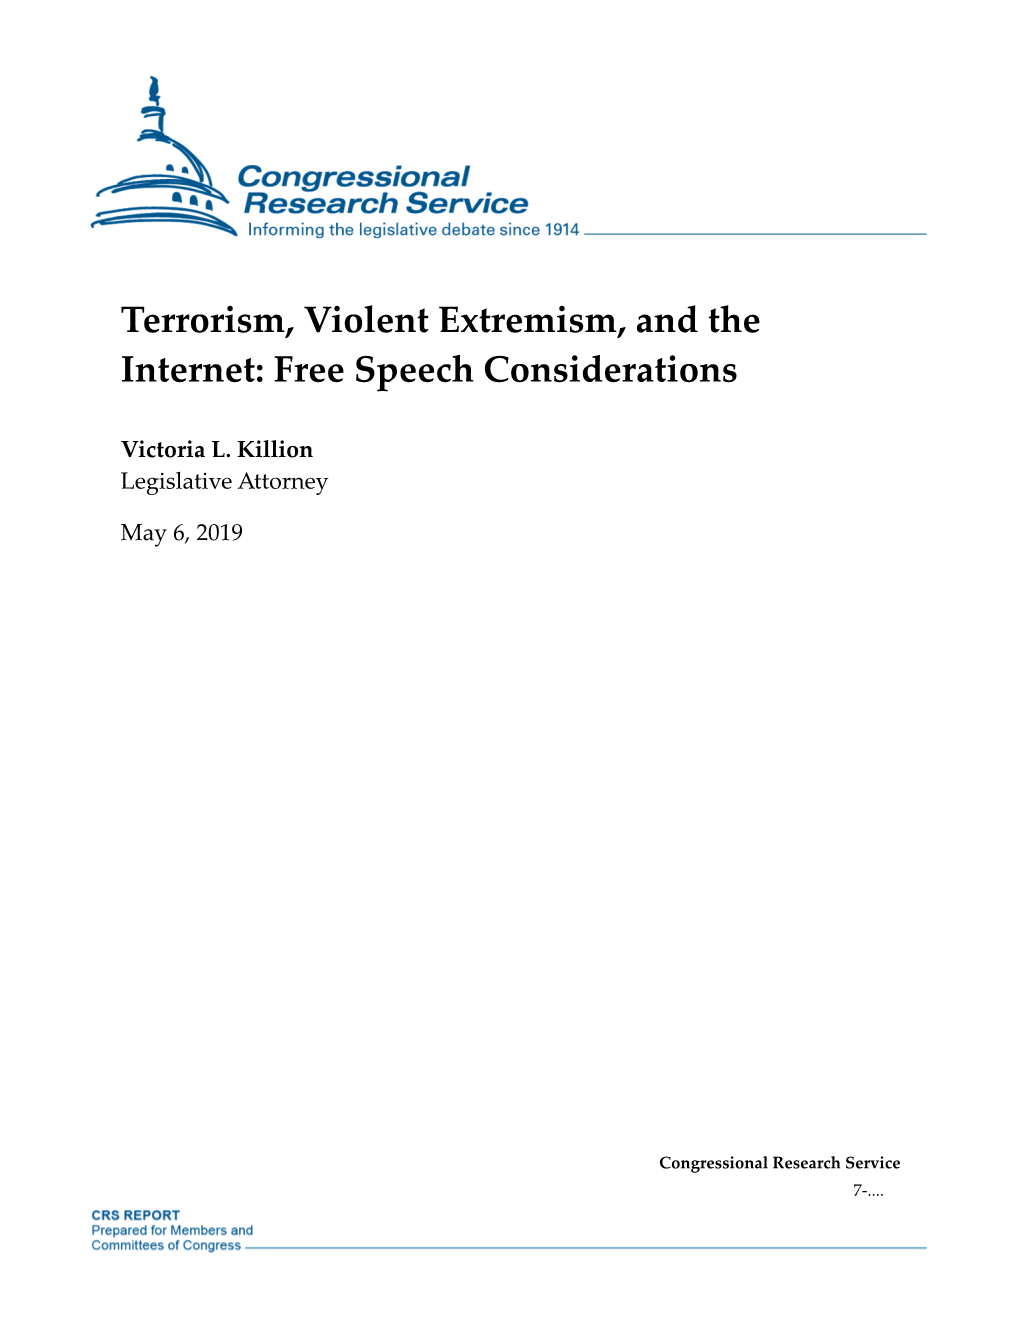 Terrorism, Violent Extremism, and the Internet: Free Speech Considerations